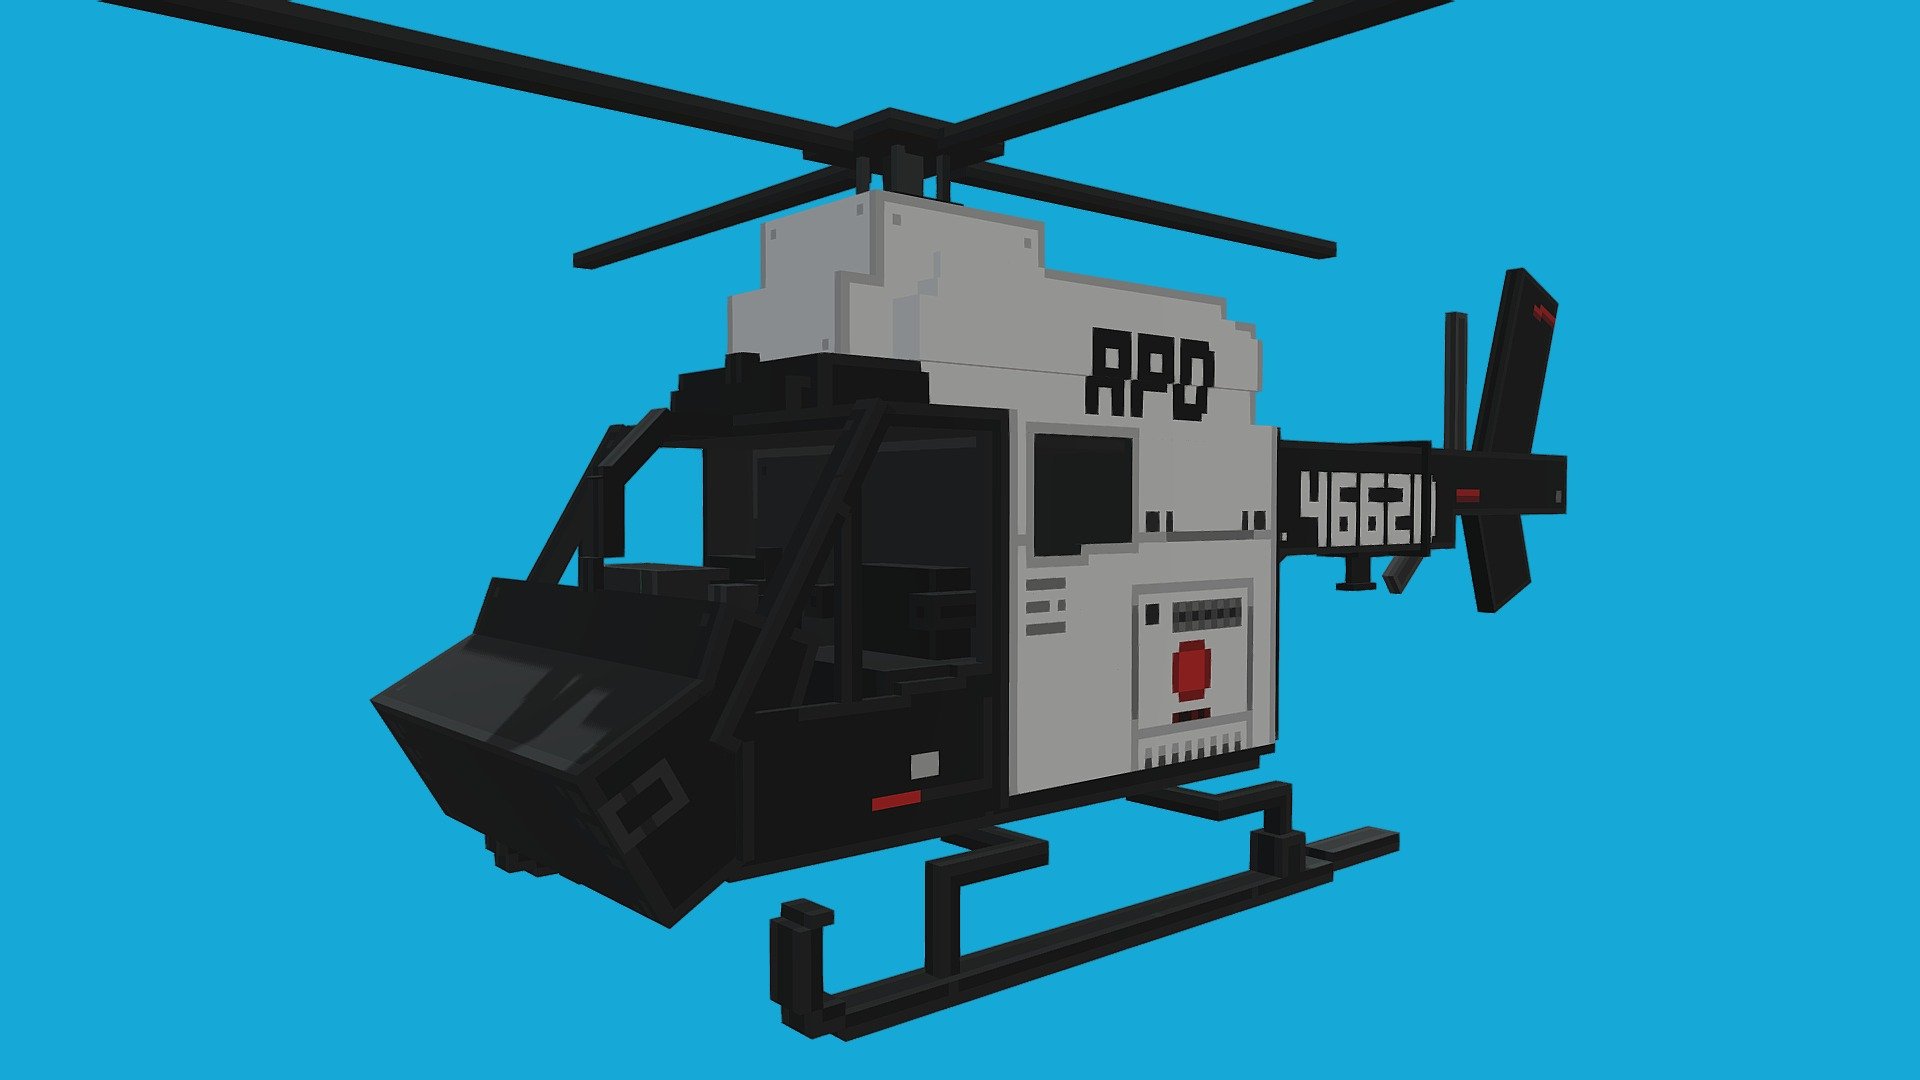 A Police chopper.


About the Project



Modelled and Textured by Sam McLaughlin (Bhuna)

Made in Blockbench




Contact Me
Available for Marketplace or Minecraft work





Follow me on twitter




Contact me on Discord: Sam McLaughlin#4095



Contact me by Email: samuelmclaughlin101@gmail.com
 - Police Helicopter - 3D model by Sam McLaughlin (@BhunaBoy) 3d model